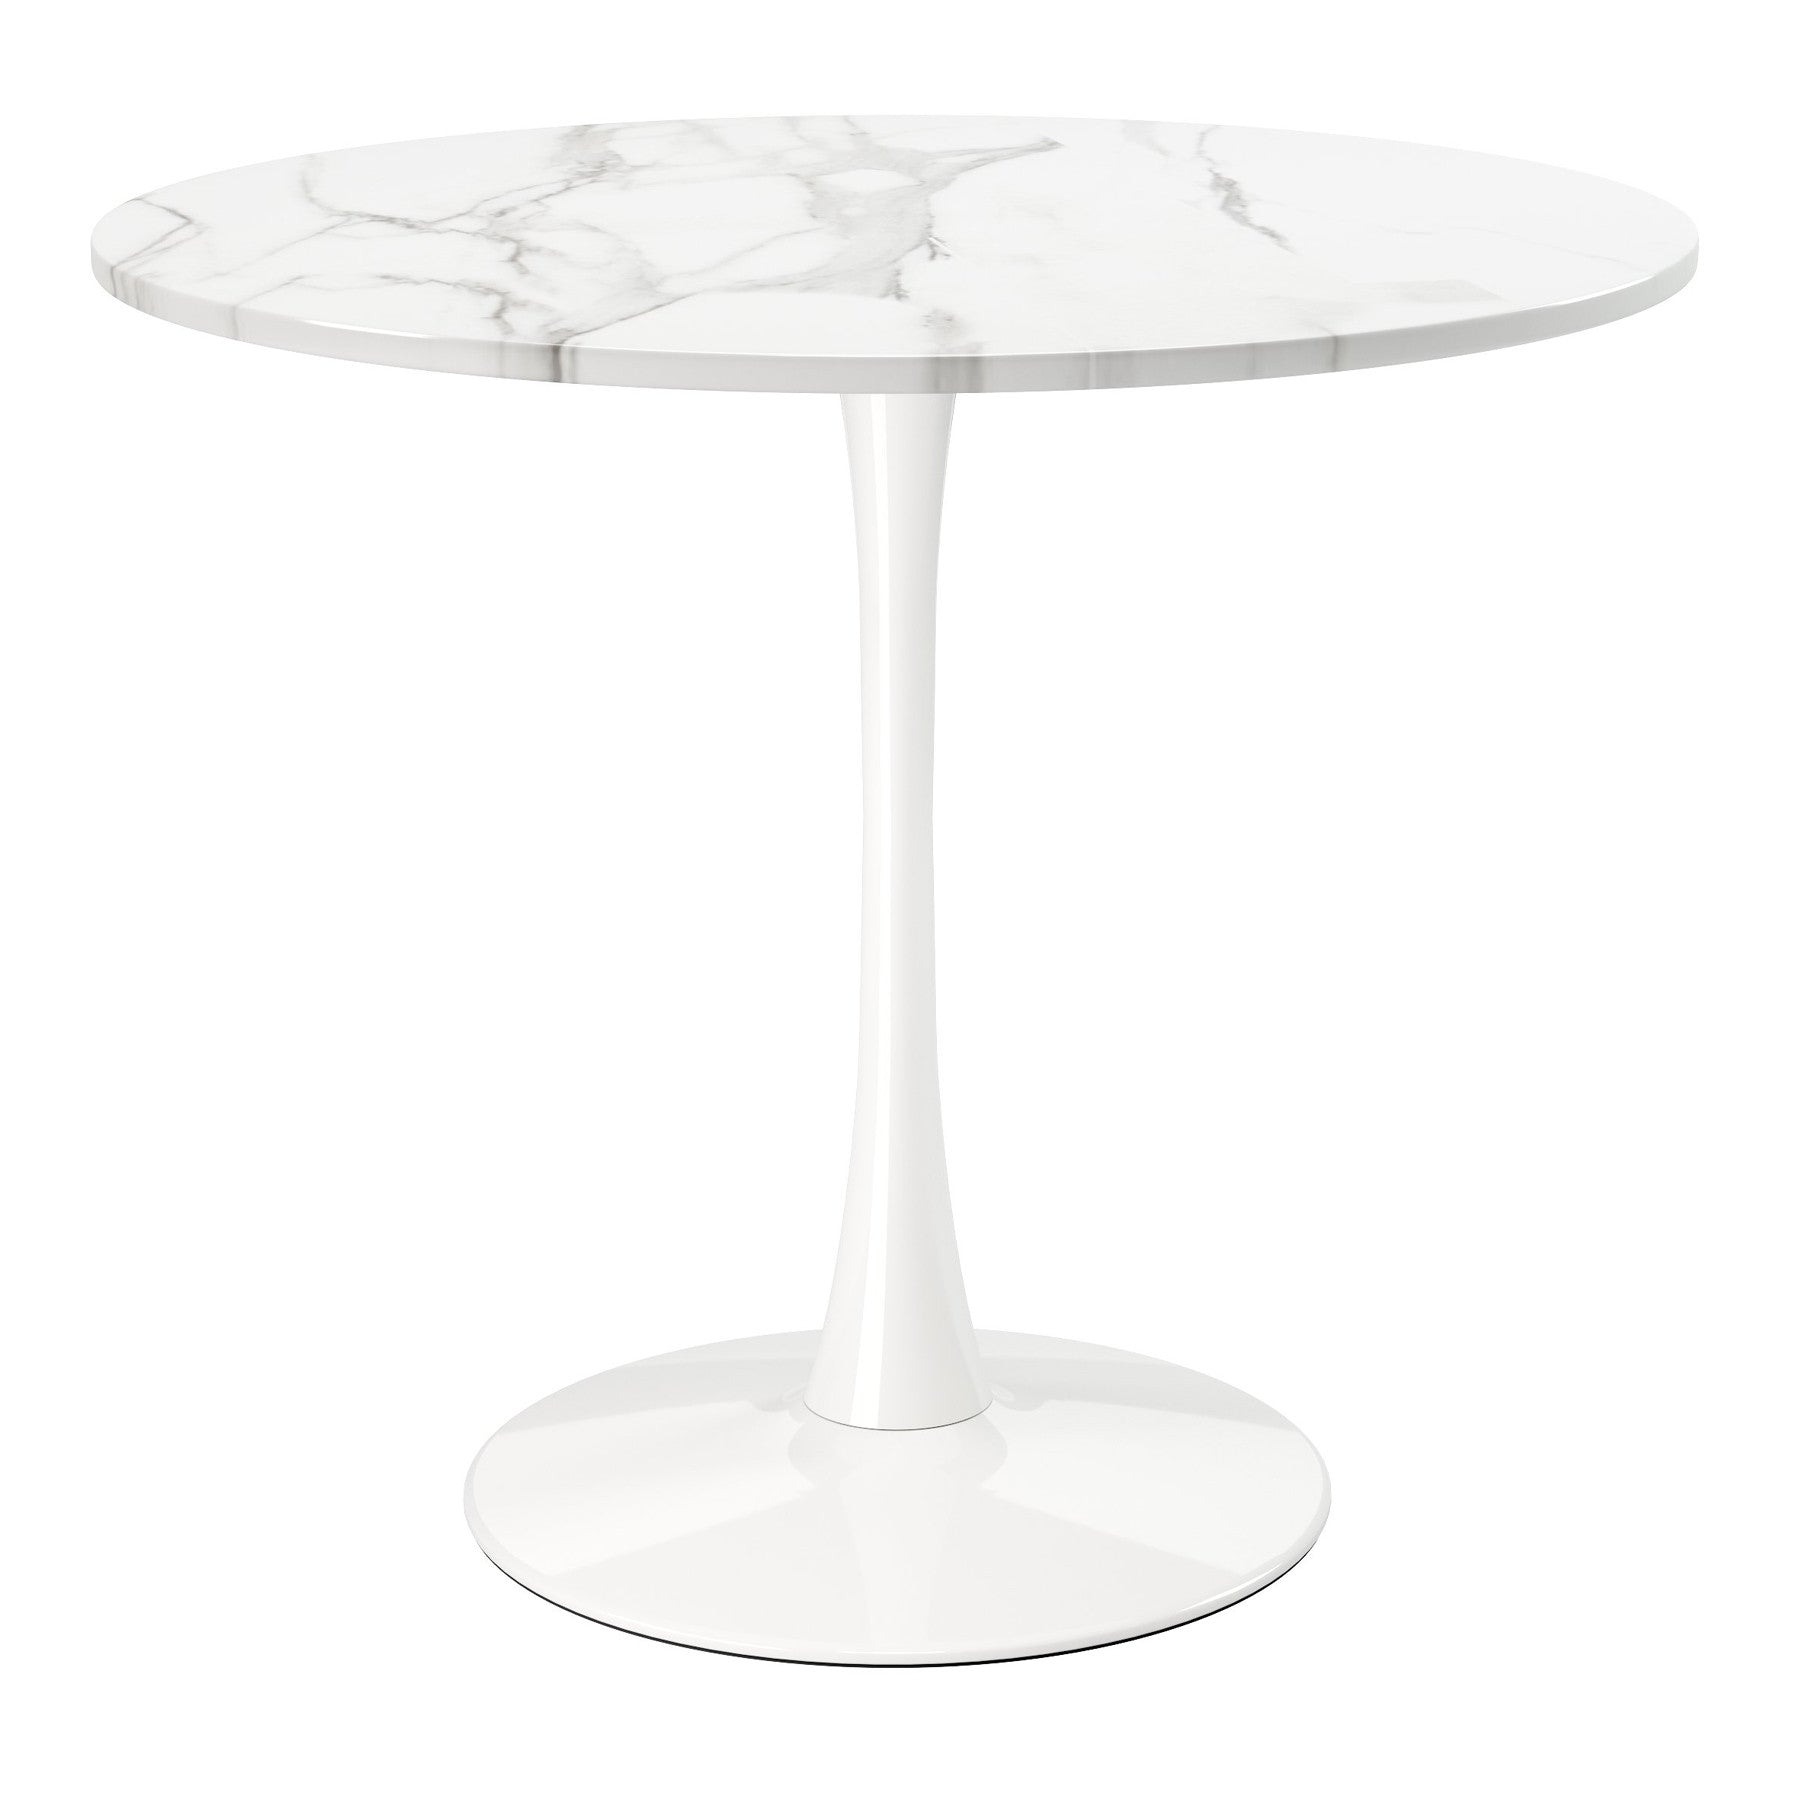 36" White Metal Dining Table